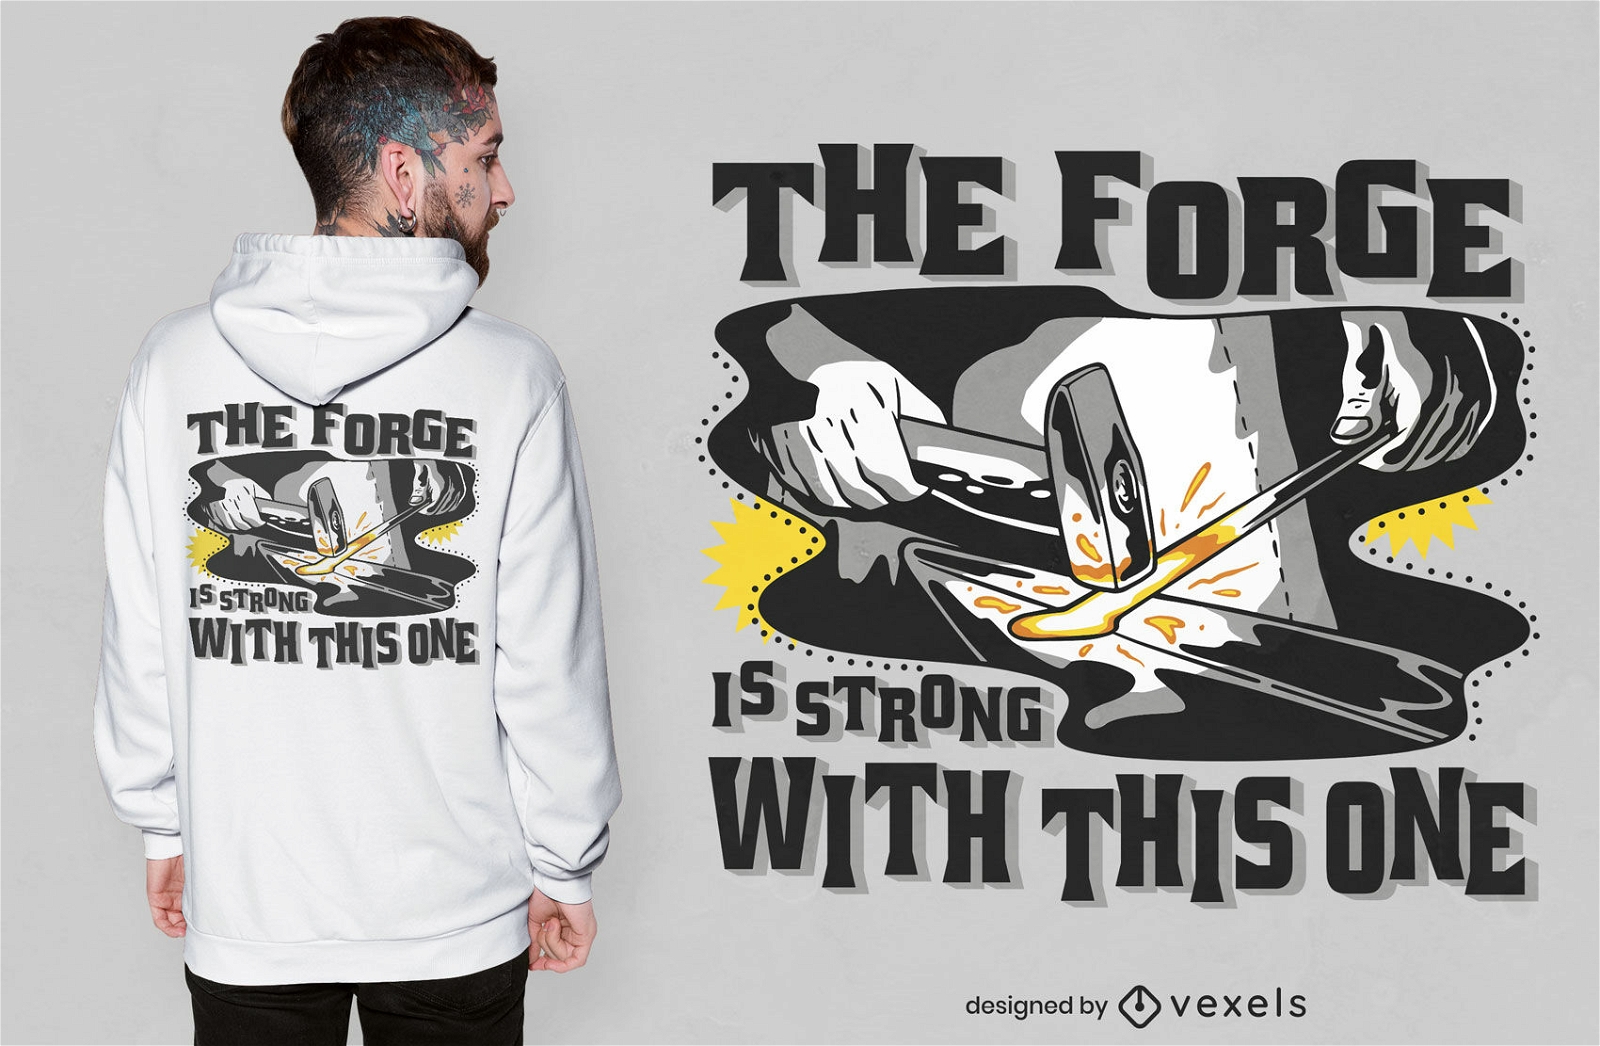 The forge is strong blacksmith t-shirt design